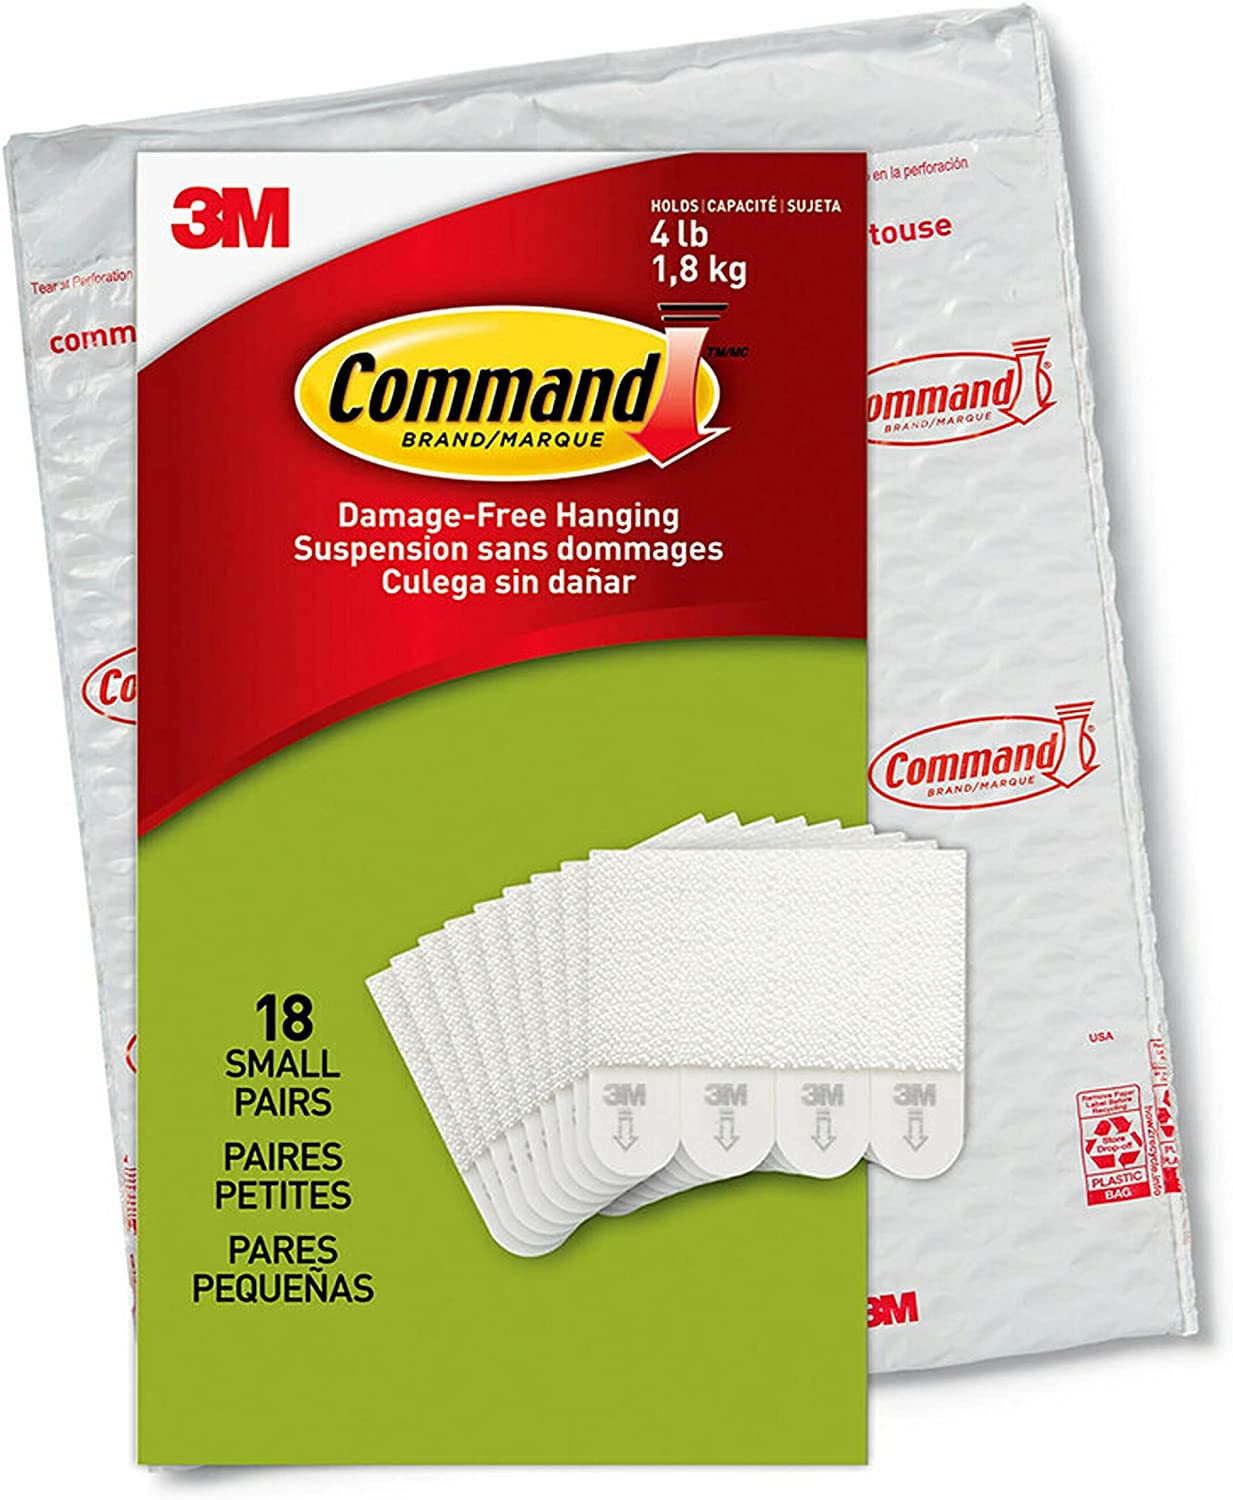 3M Command Removable Adhesive Utility wall strips Refill Adhesive  tape,Plastic, White,medium size 6.9cm*1.6cm